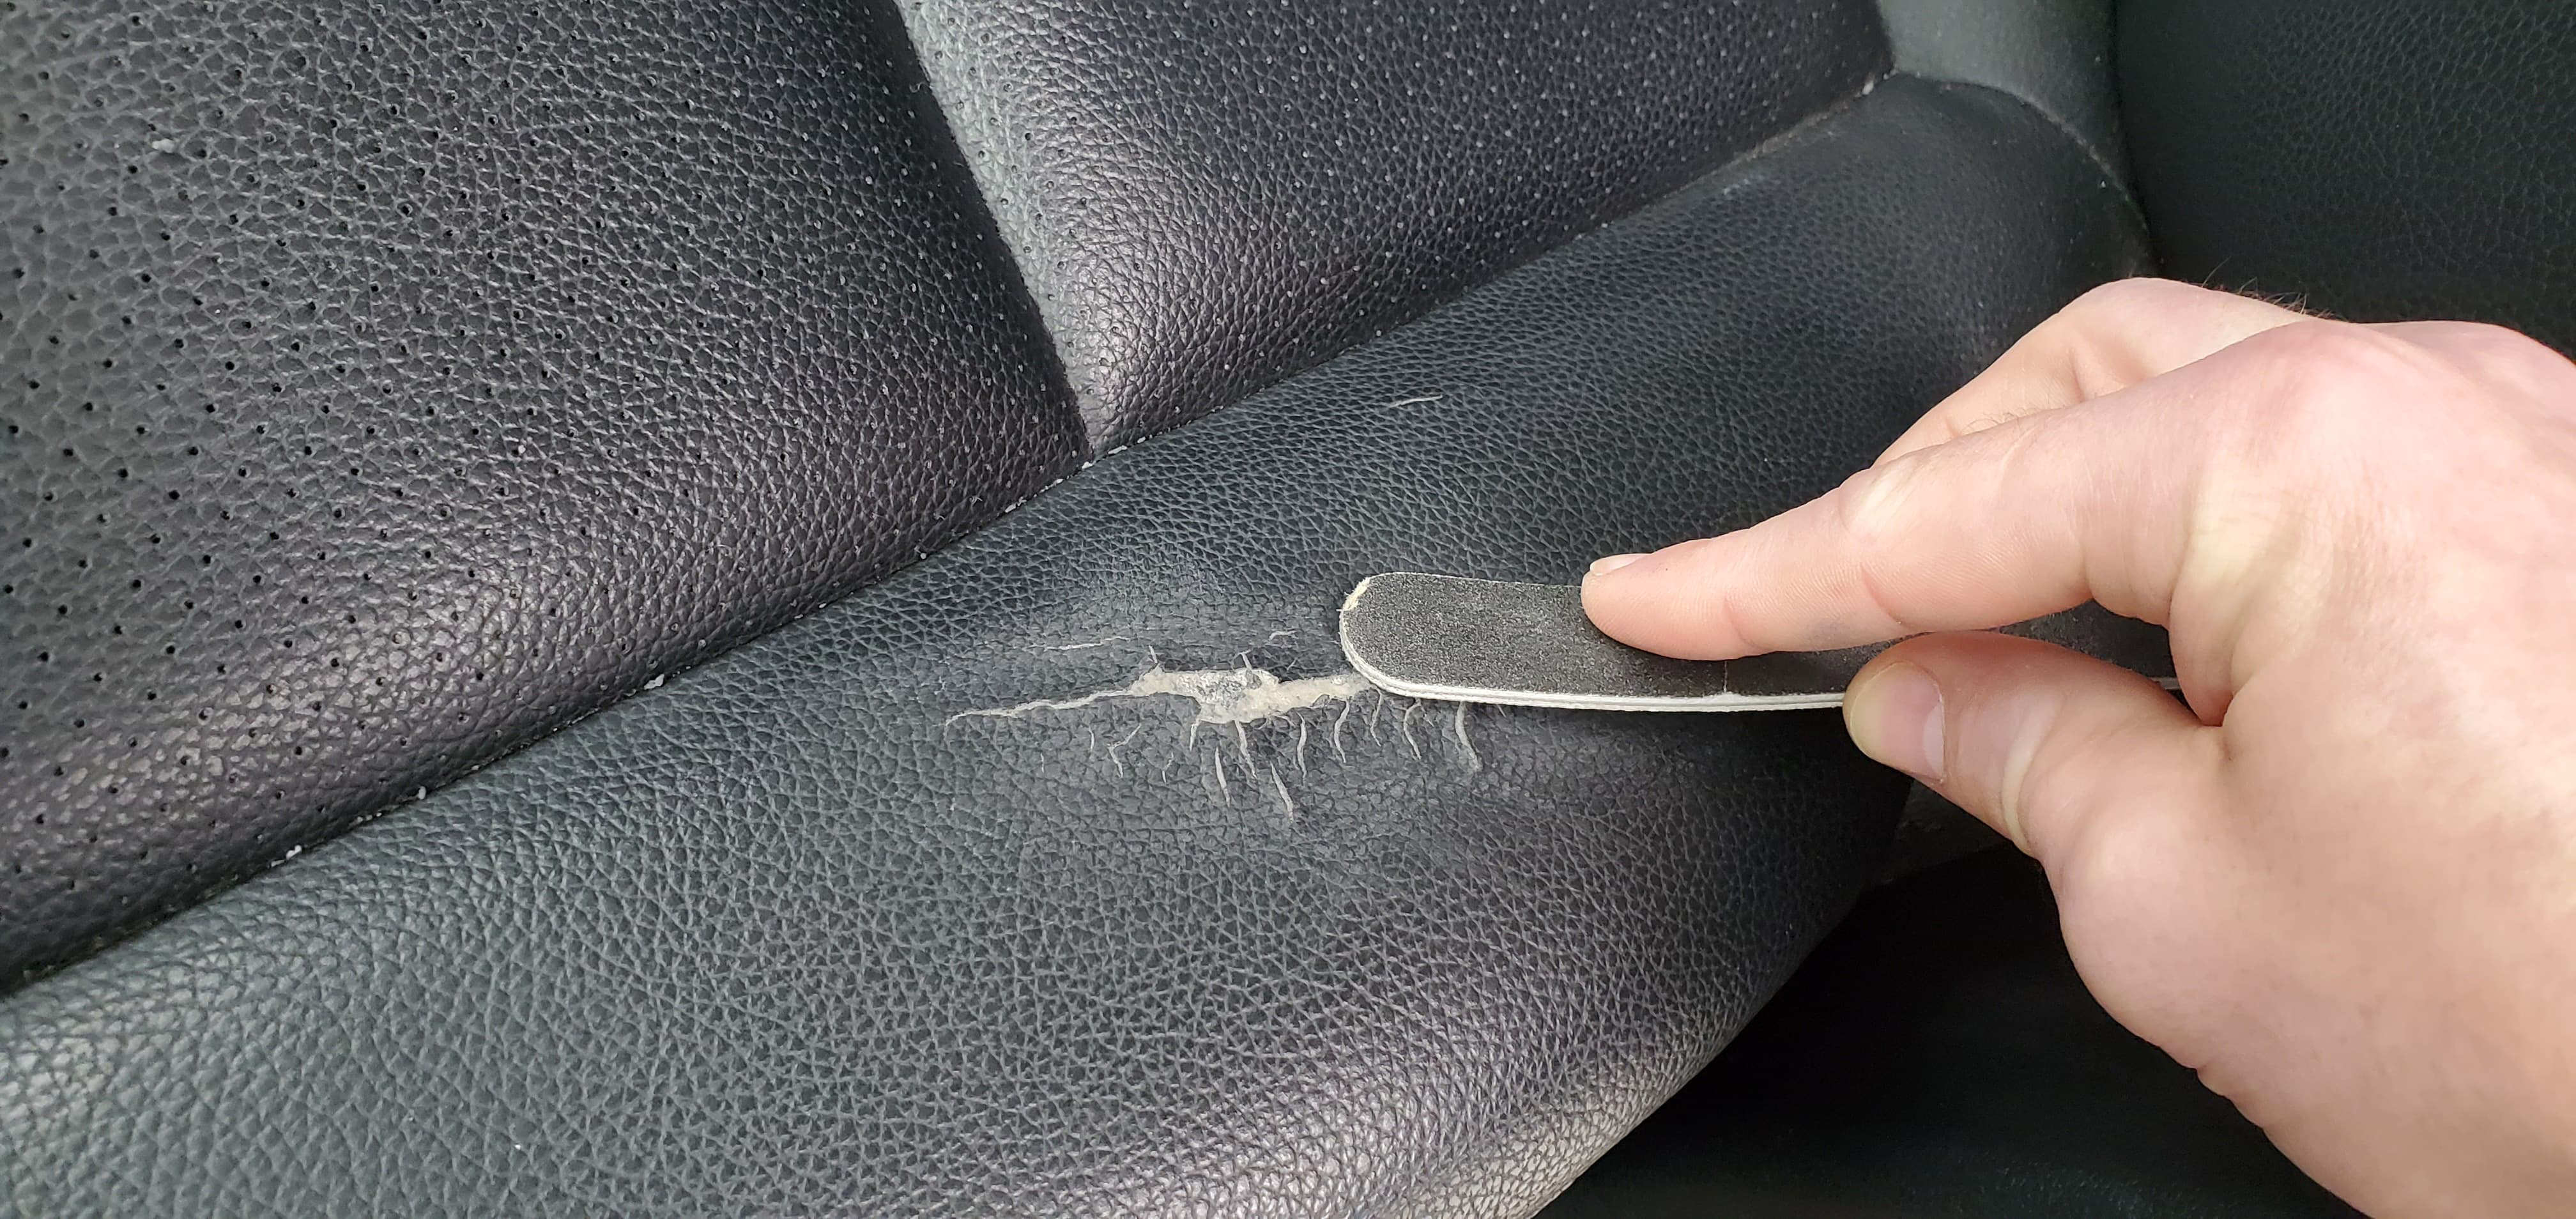 How To Repair A Leather Car Seat - How To Fix Holes In Leather Seats